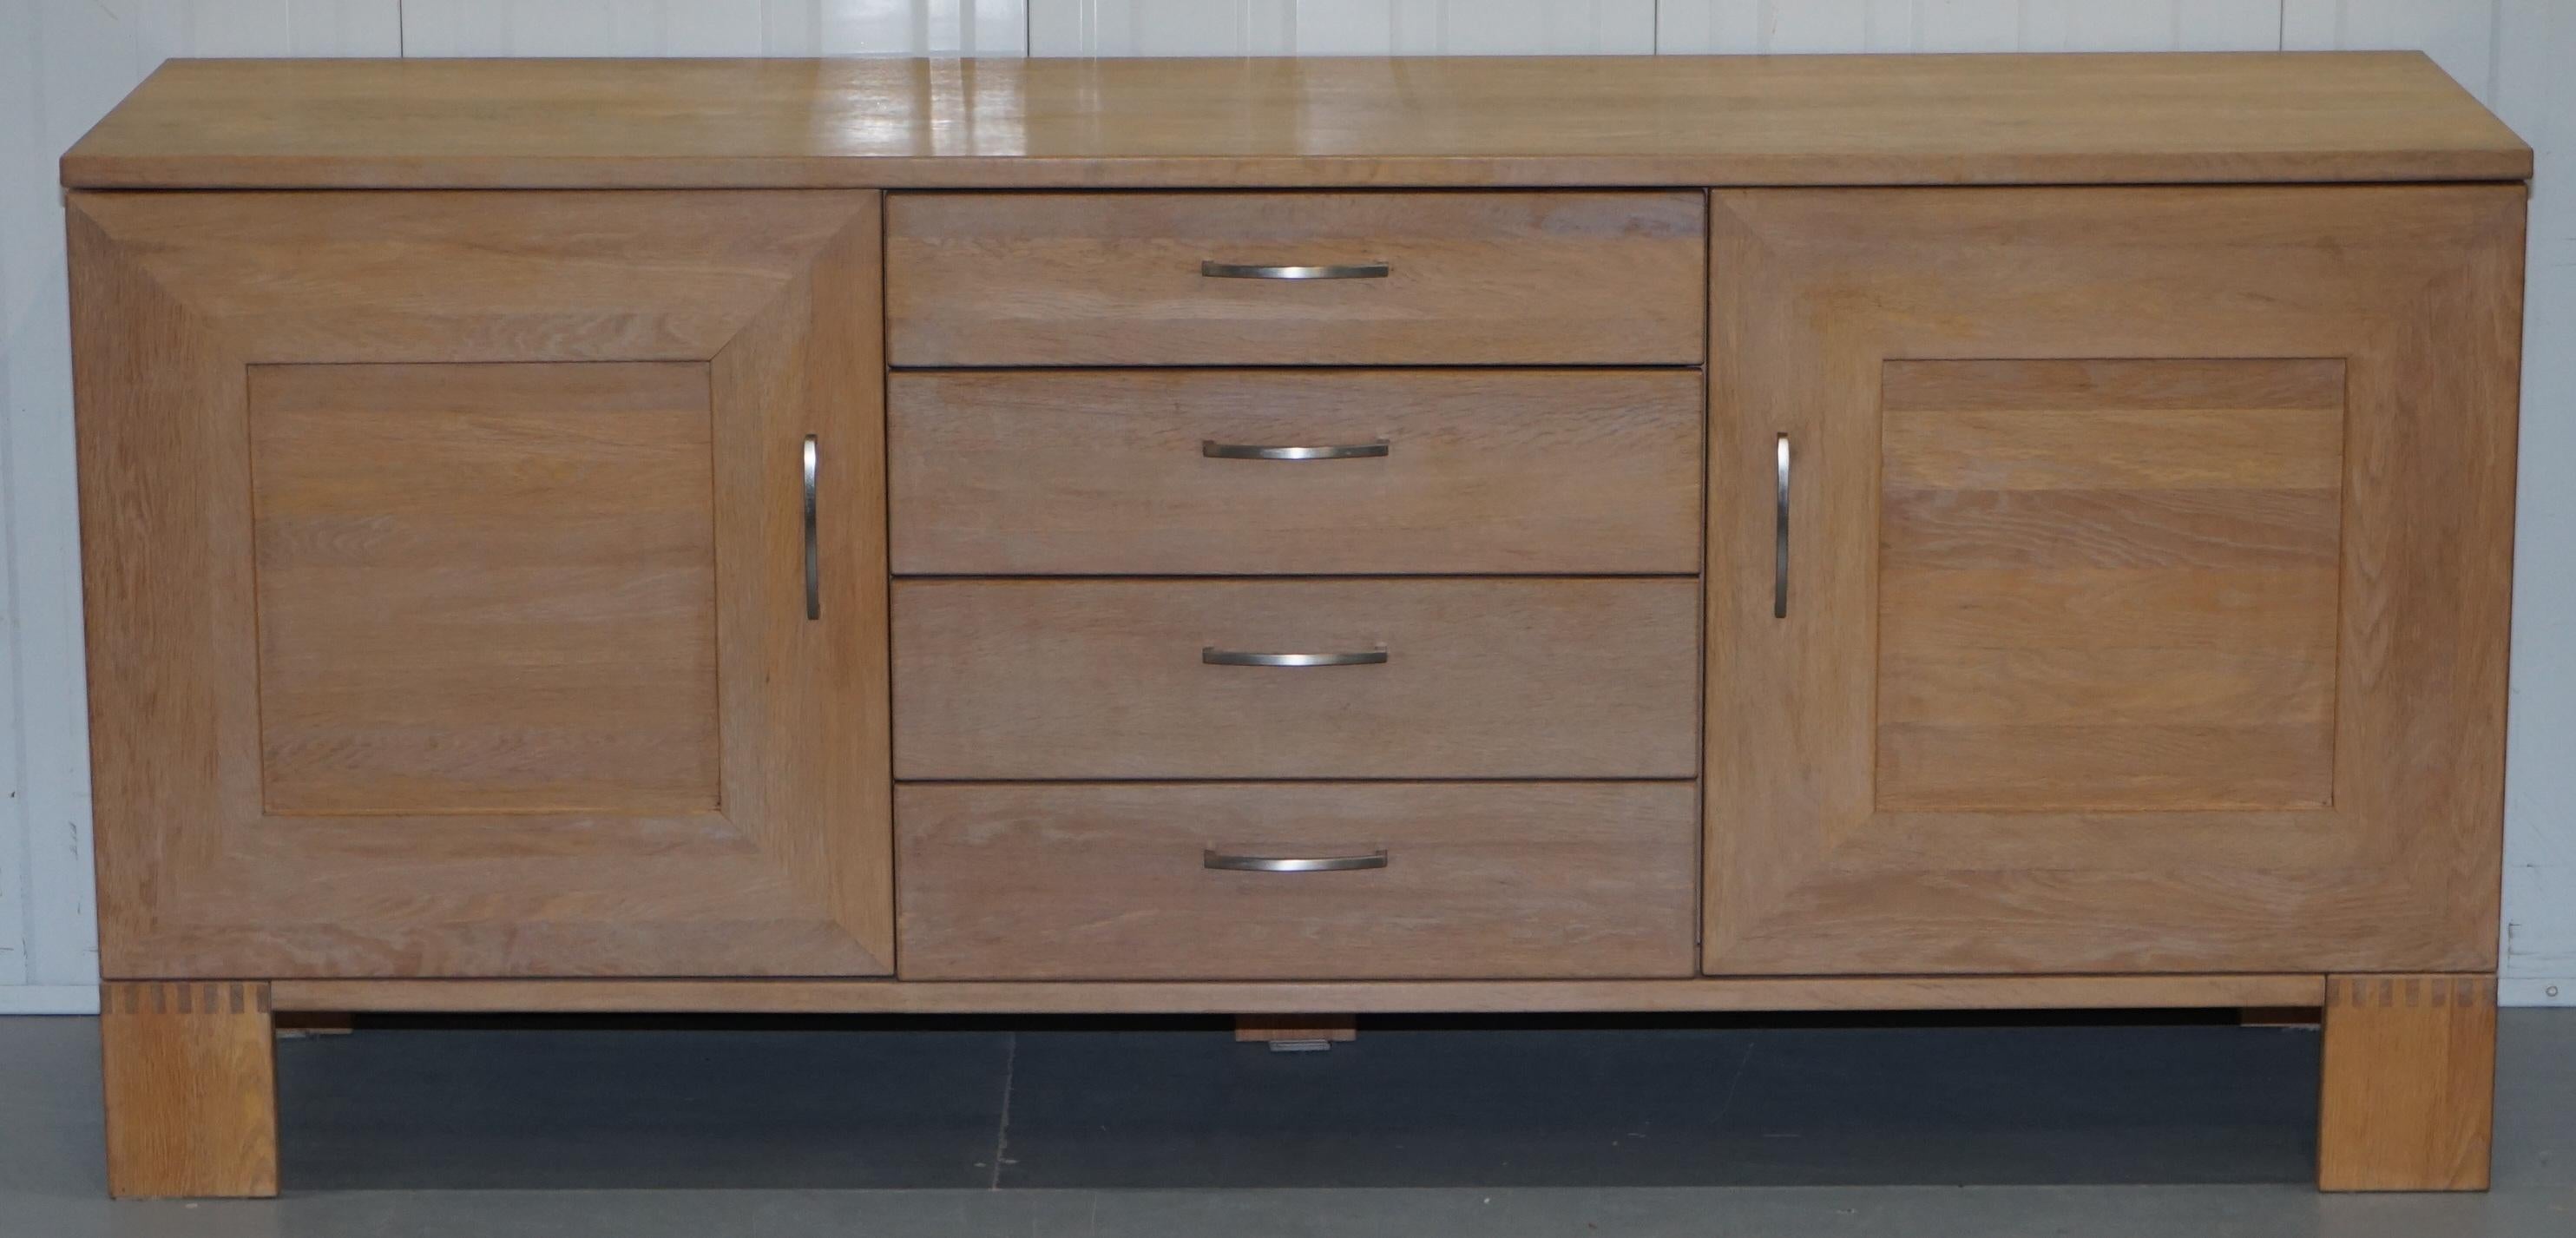 We are delighted to offer for sale this original Orum Mobler solid Ash sideboard with drawers

Please note the delivery fee listed is just a guide, it covers within the M25 only

This sideboard is part of a suite, I have the matching set of